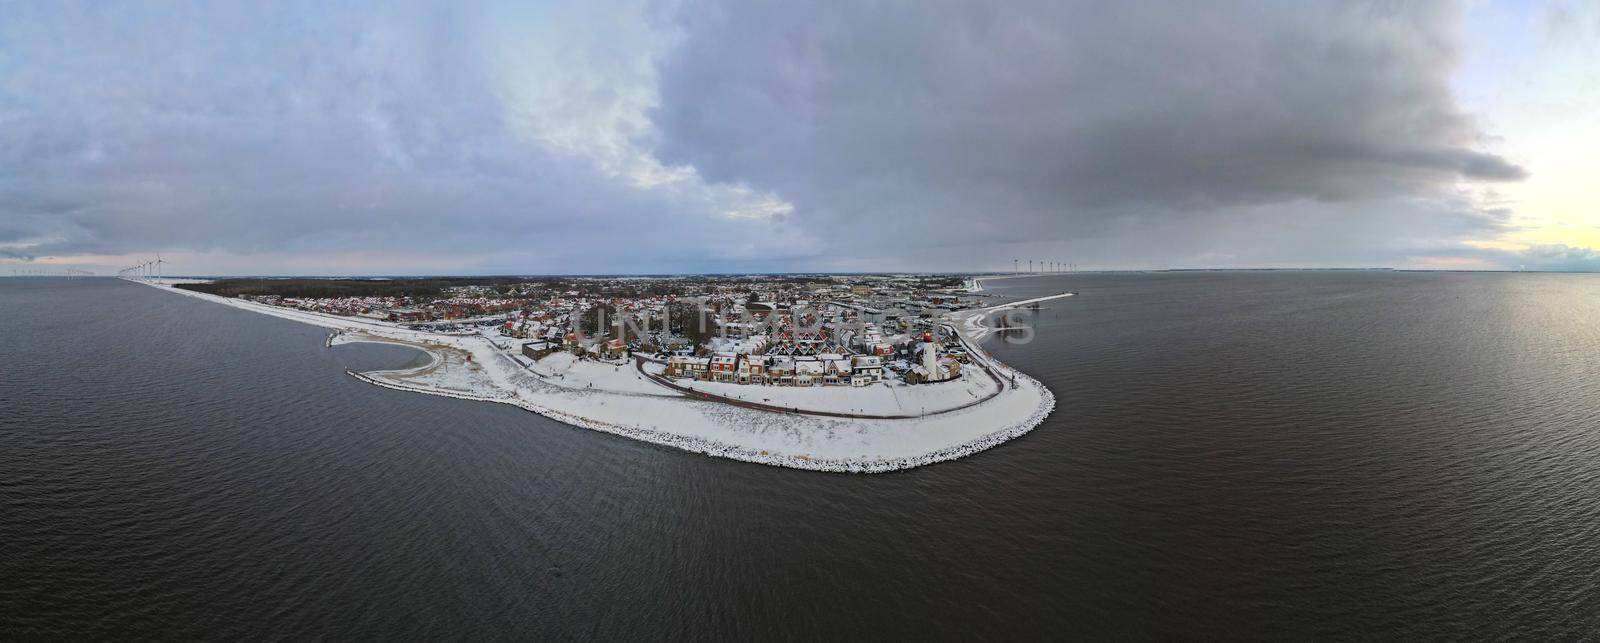 snow covered beach during wnter by Urk lighthouse in the Netherlands. cold winter weather in the Netherlands